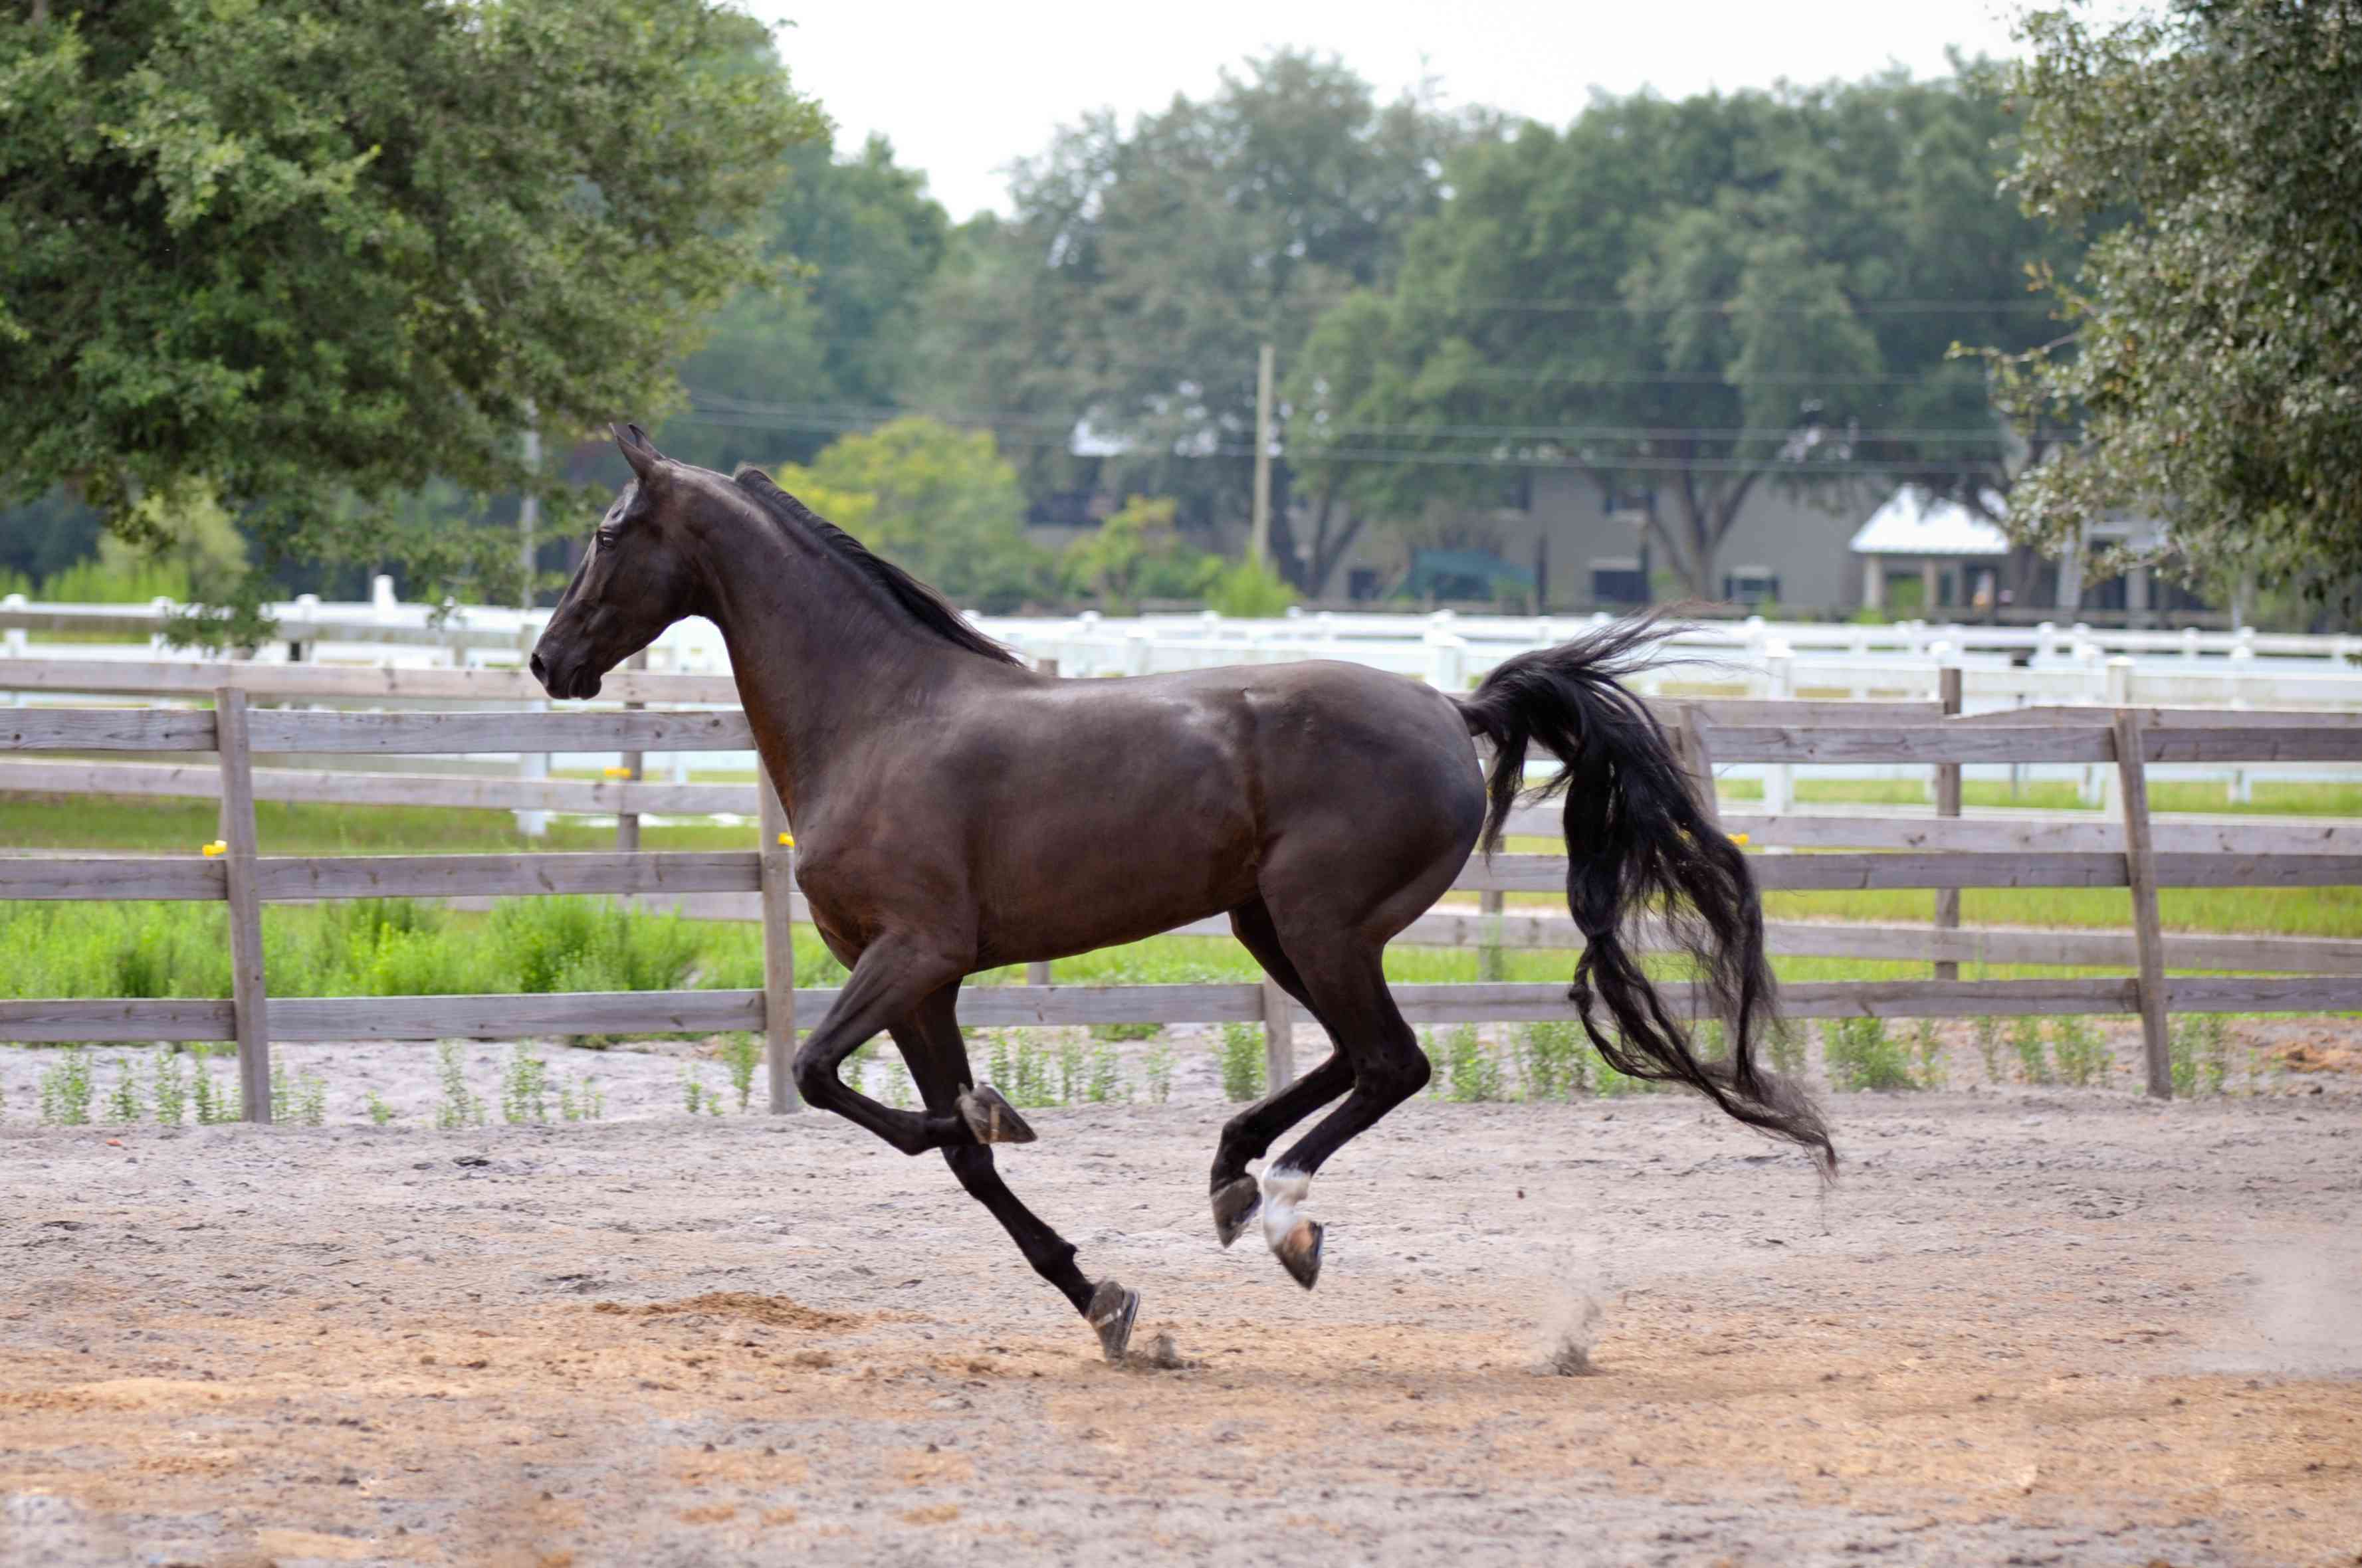 Saddlebred cantering in a paddock.